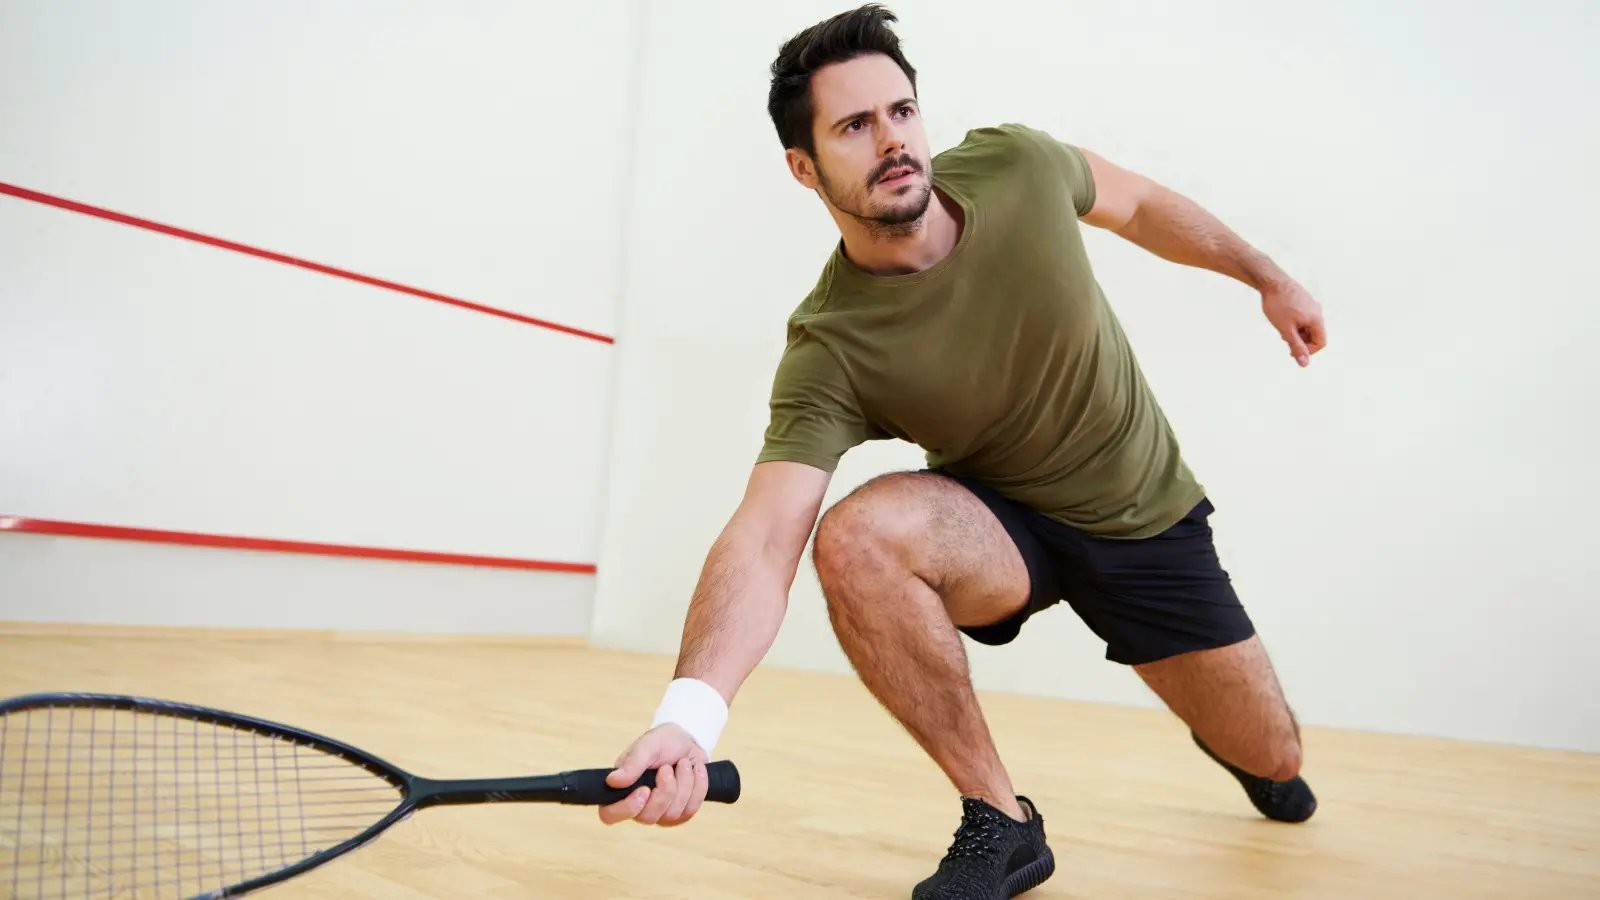 Boosts balance and coordination - Playing Racquetball